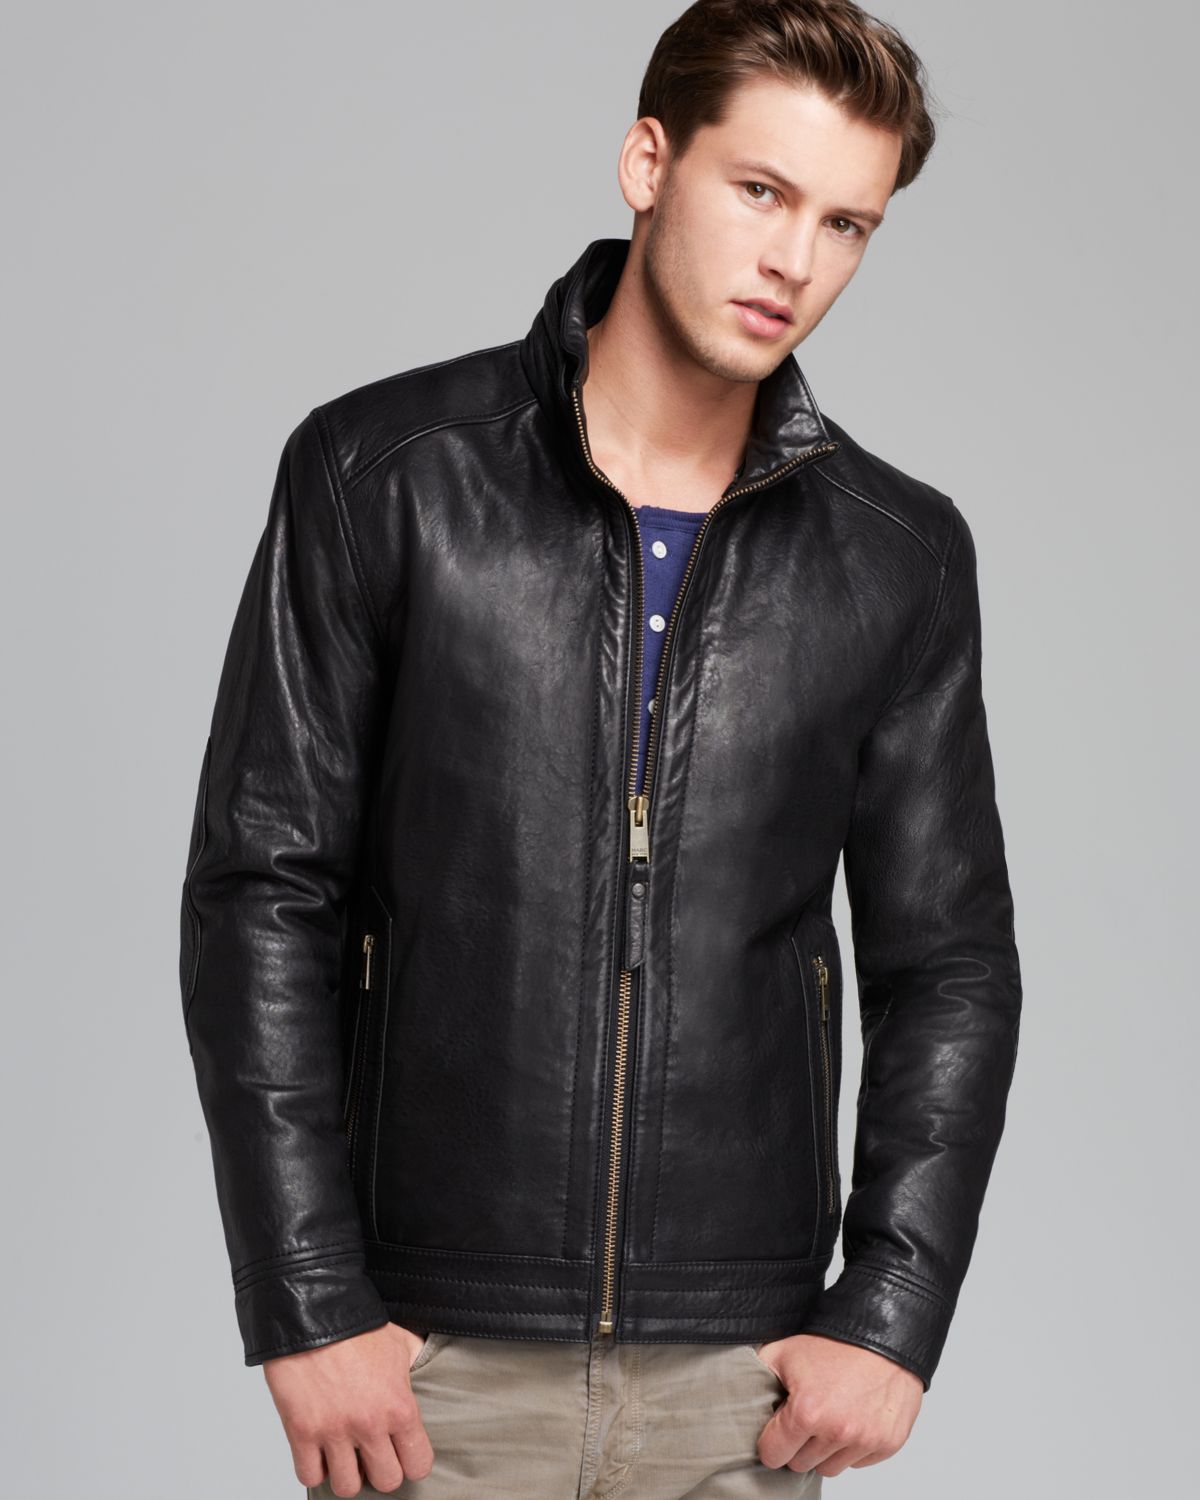 Lyst - Marc New York Nathan Leather Jacket in Black for Men